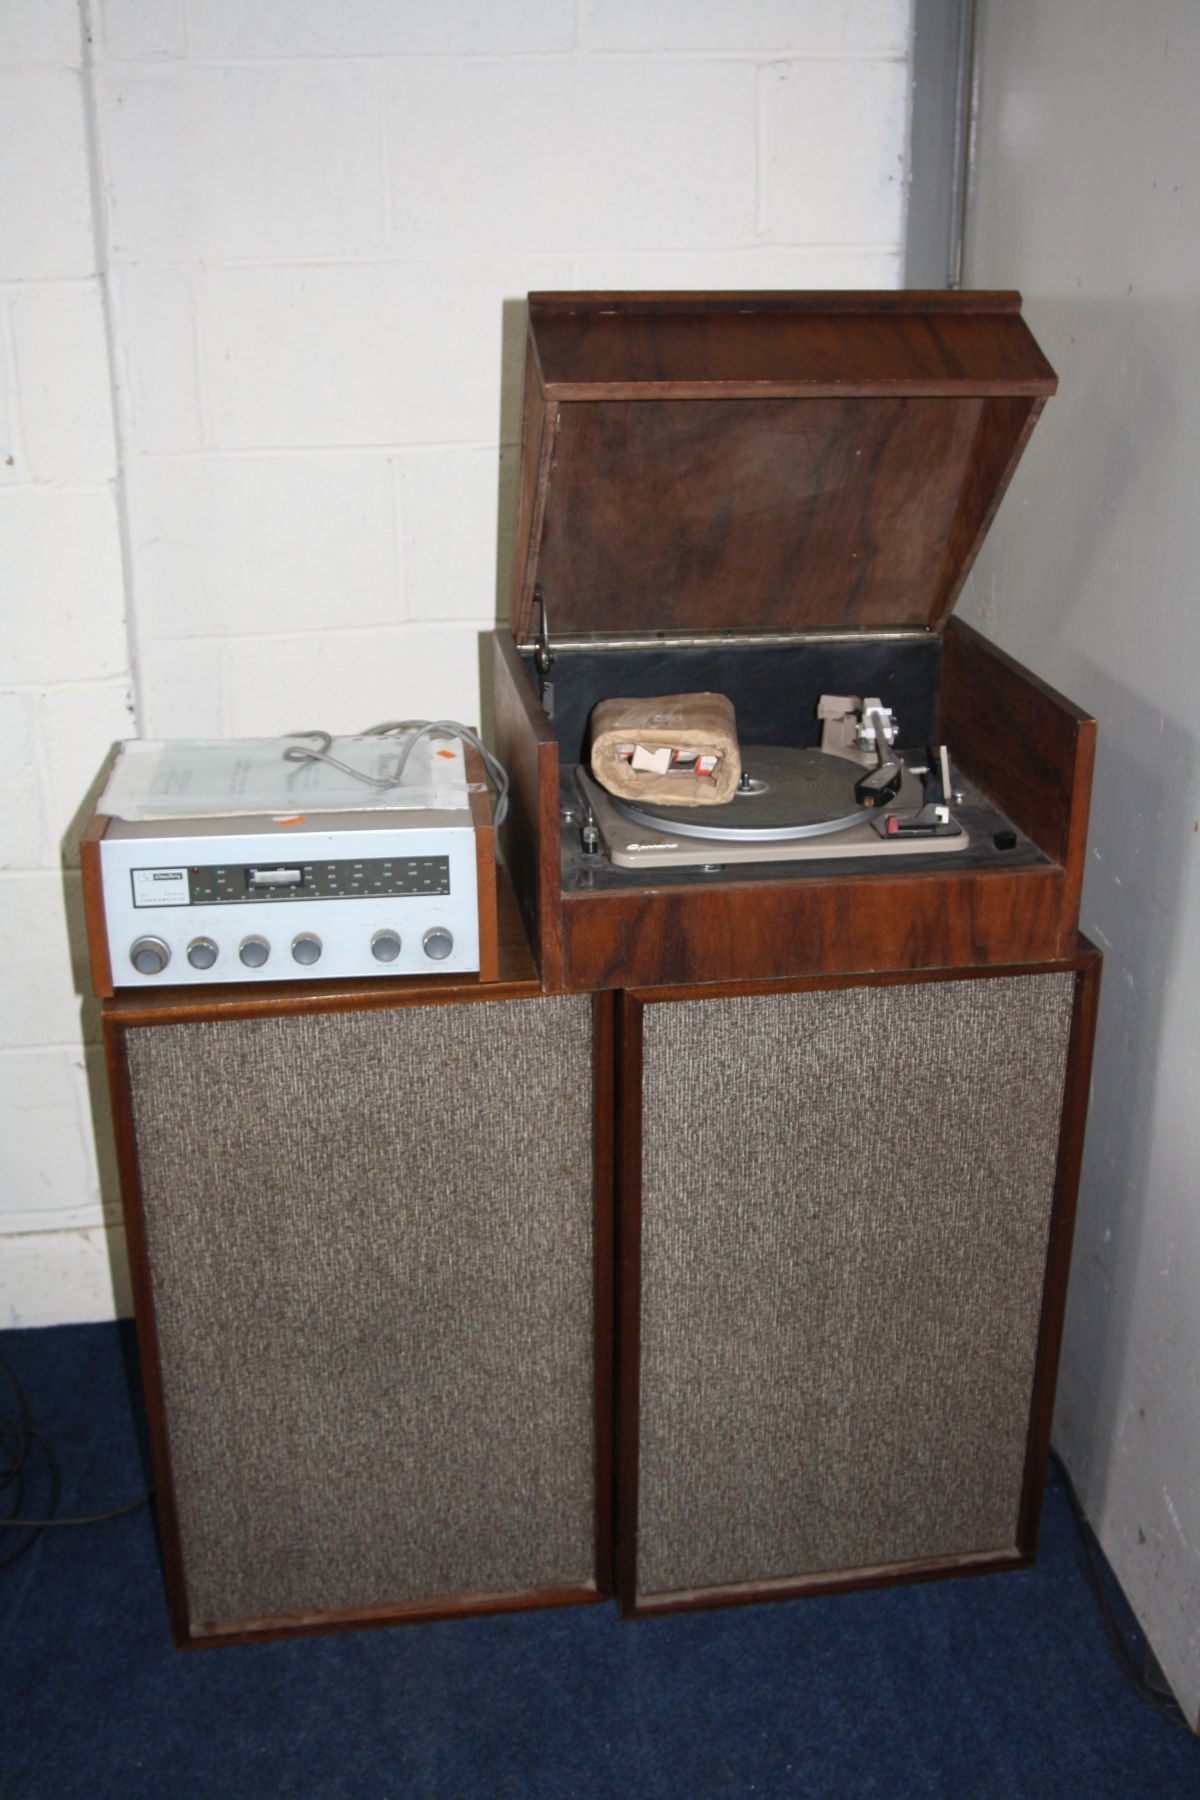 A SELECTION OF VINTAGE HIFI EQUIPMENT including an Armstrong 127 Stereo tuner amplifier, a bespoke